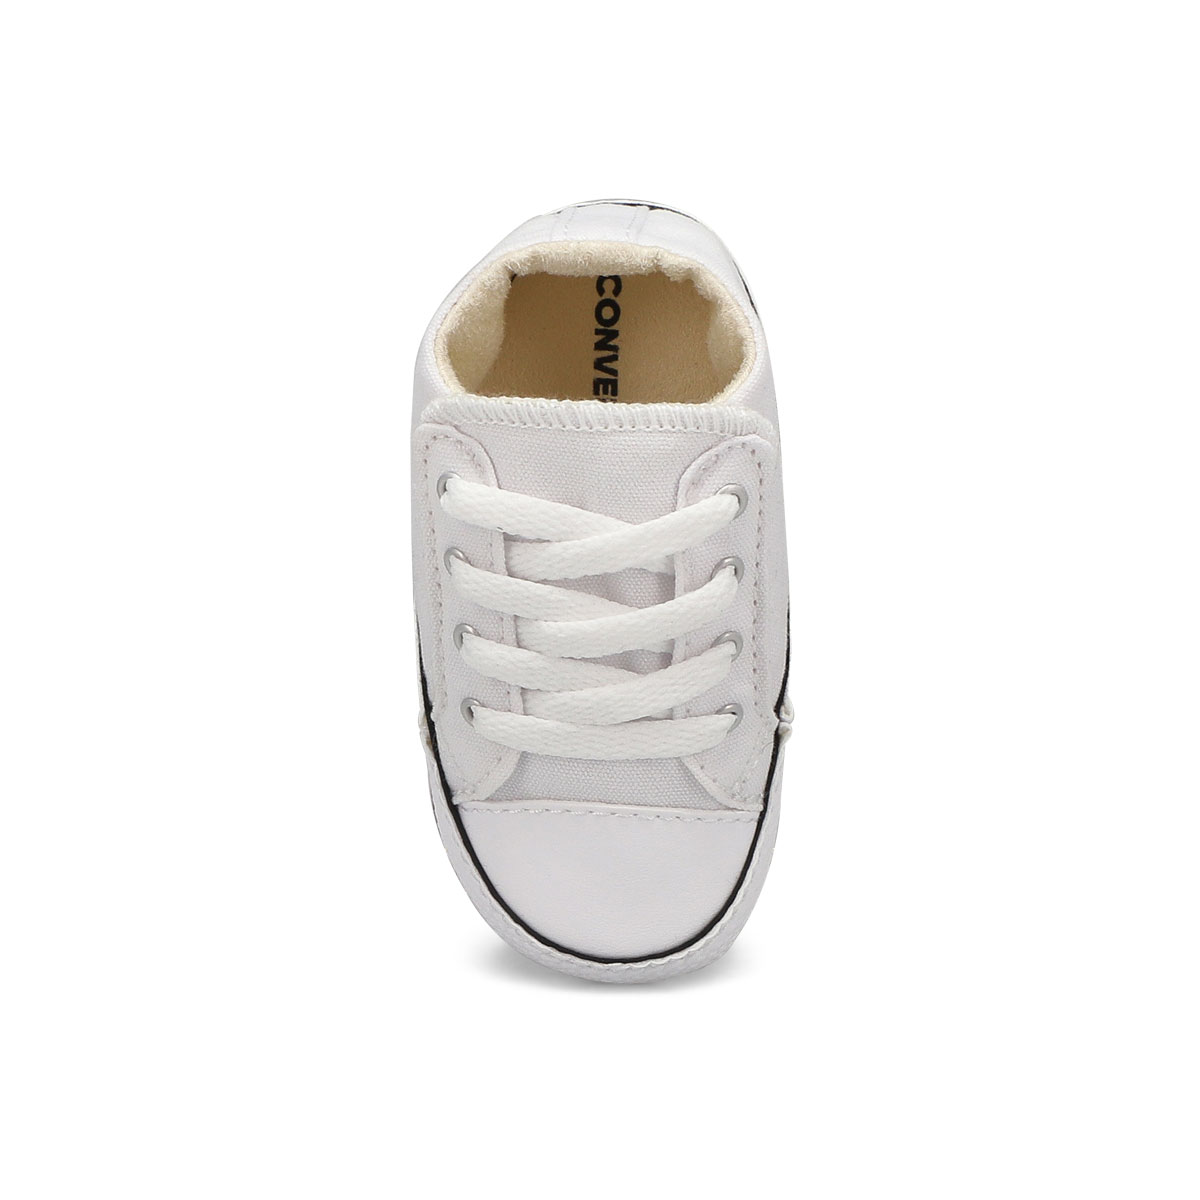 Infants' Chuck Taylor All Star Cribster Sneaker - White